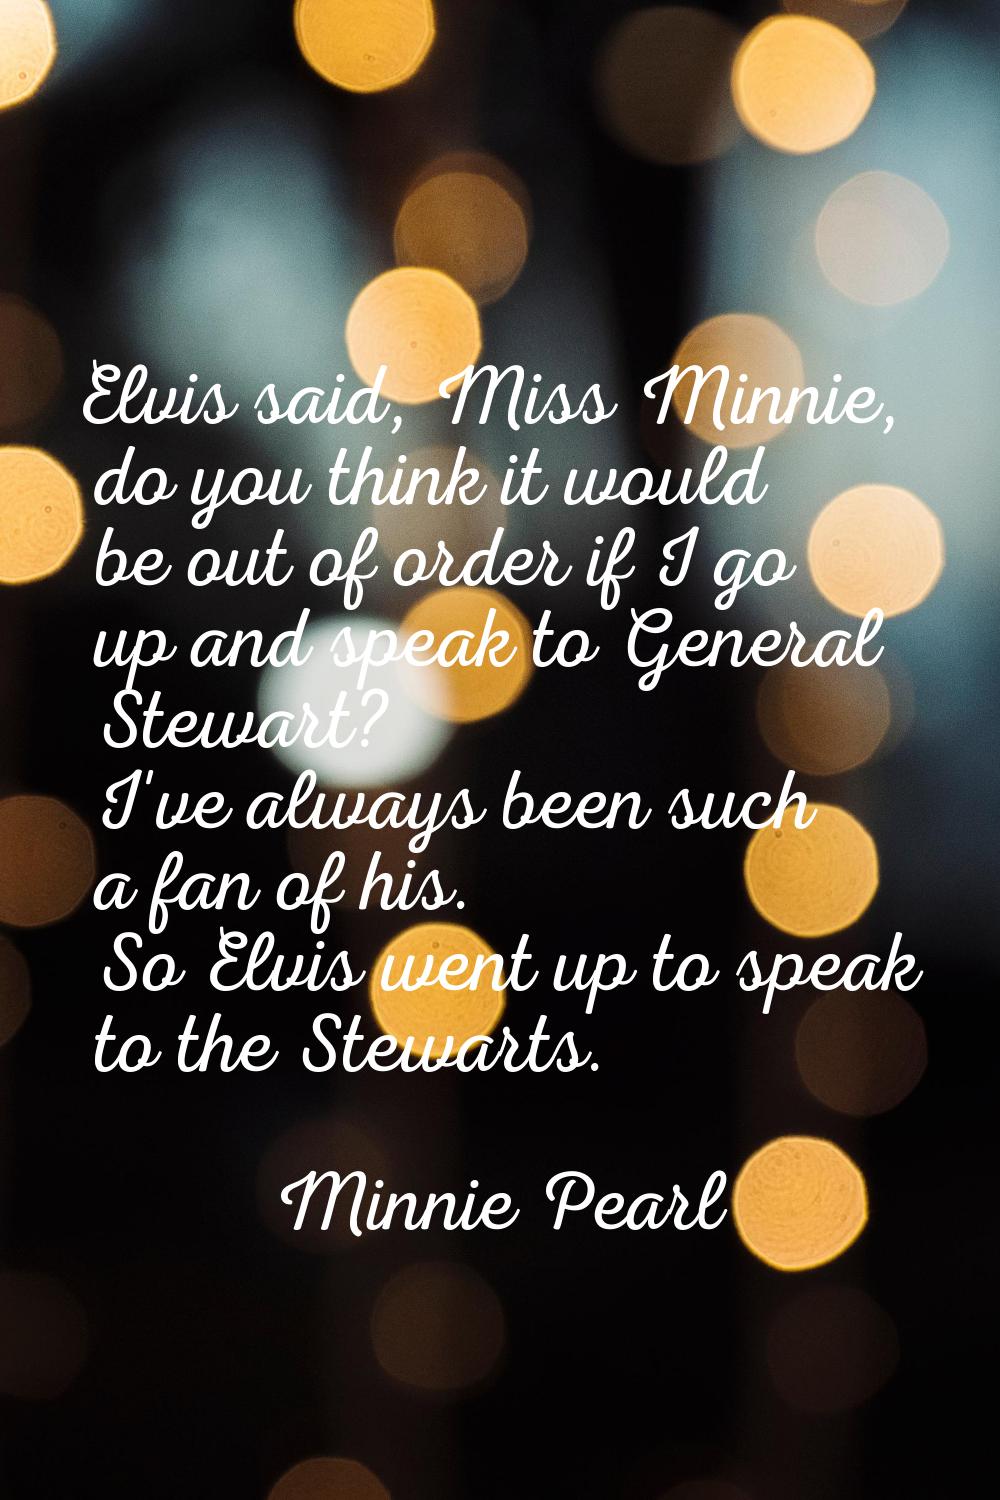 Elvis said, Miss Minnie, do you think it would be out of order if I go up and speak to General Stew